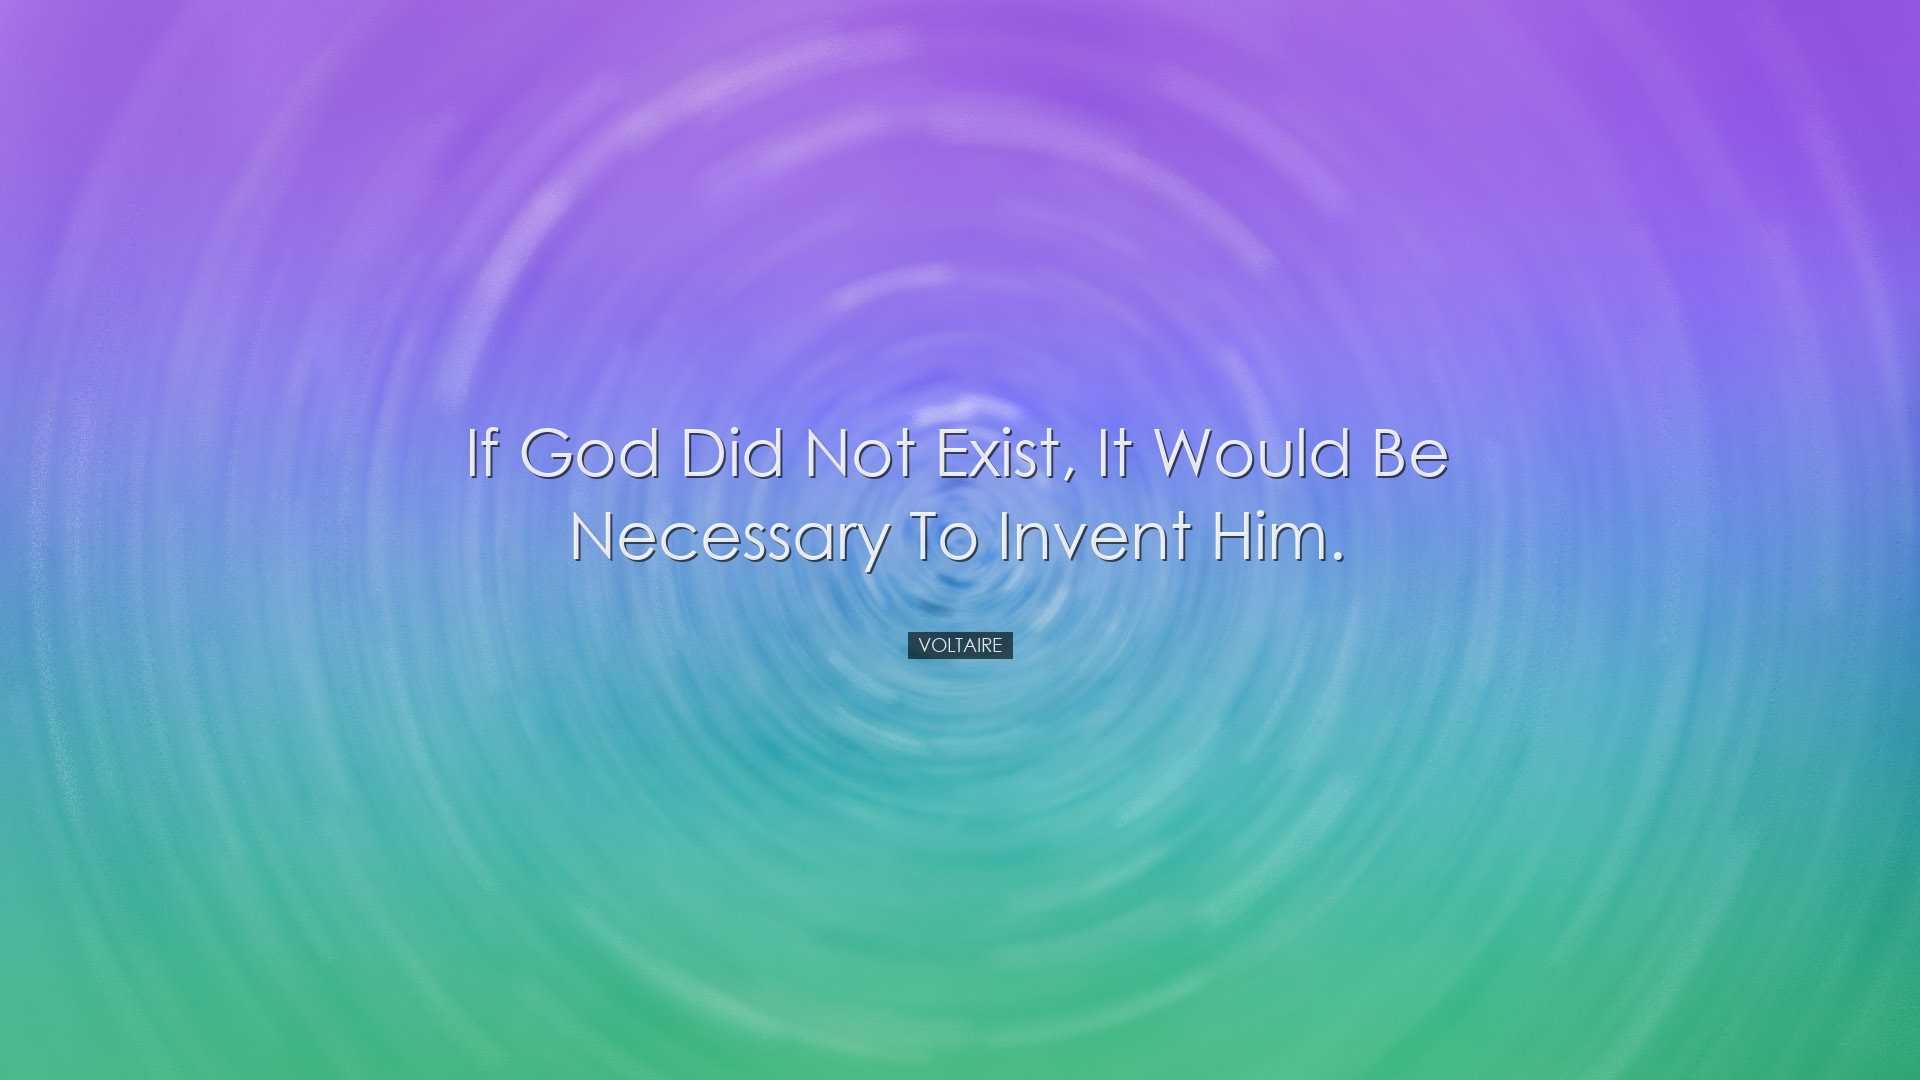 If God did not exist, it would be necessary to invent him. - Volta